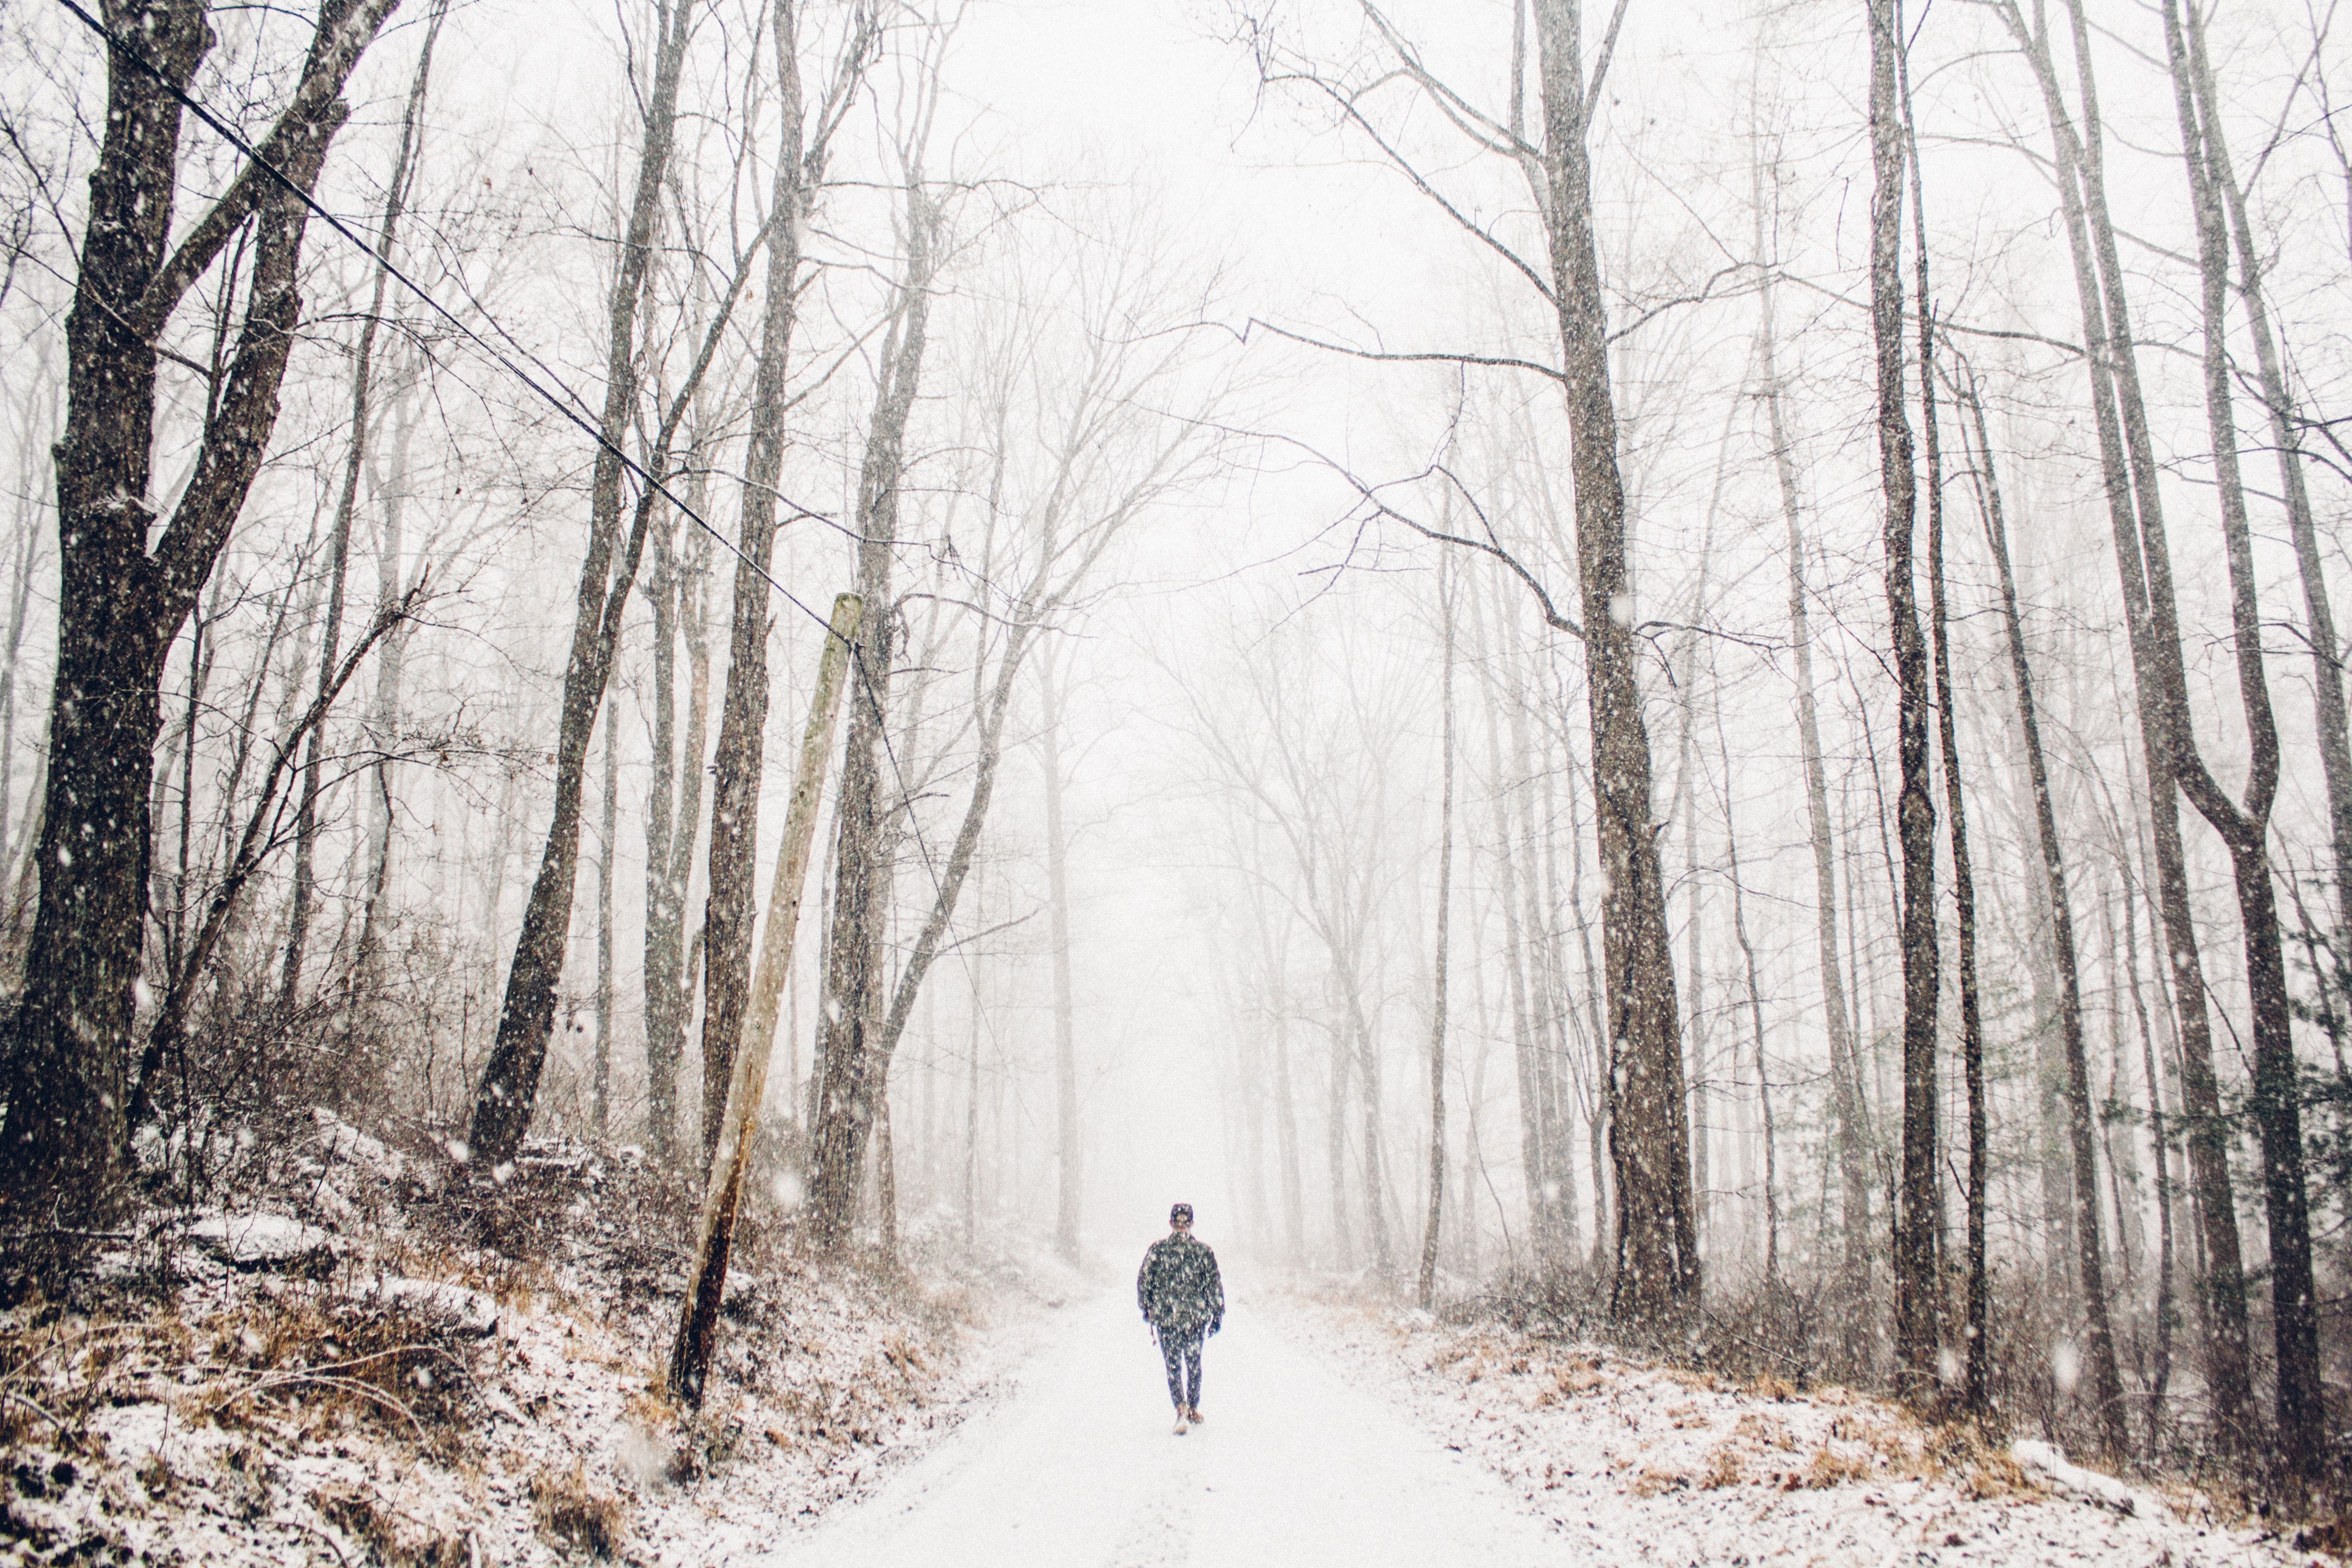 man walking in snow in the middle of the forest free image